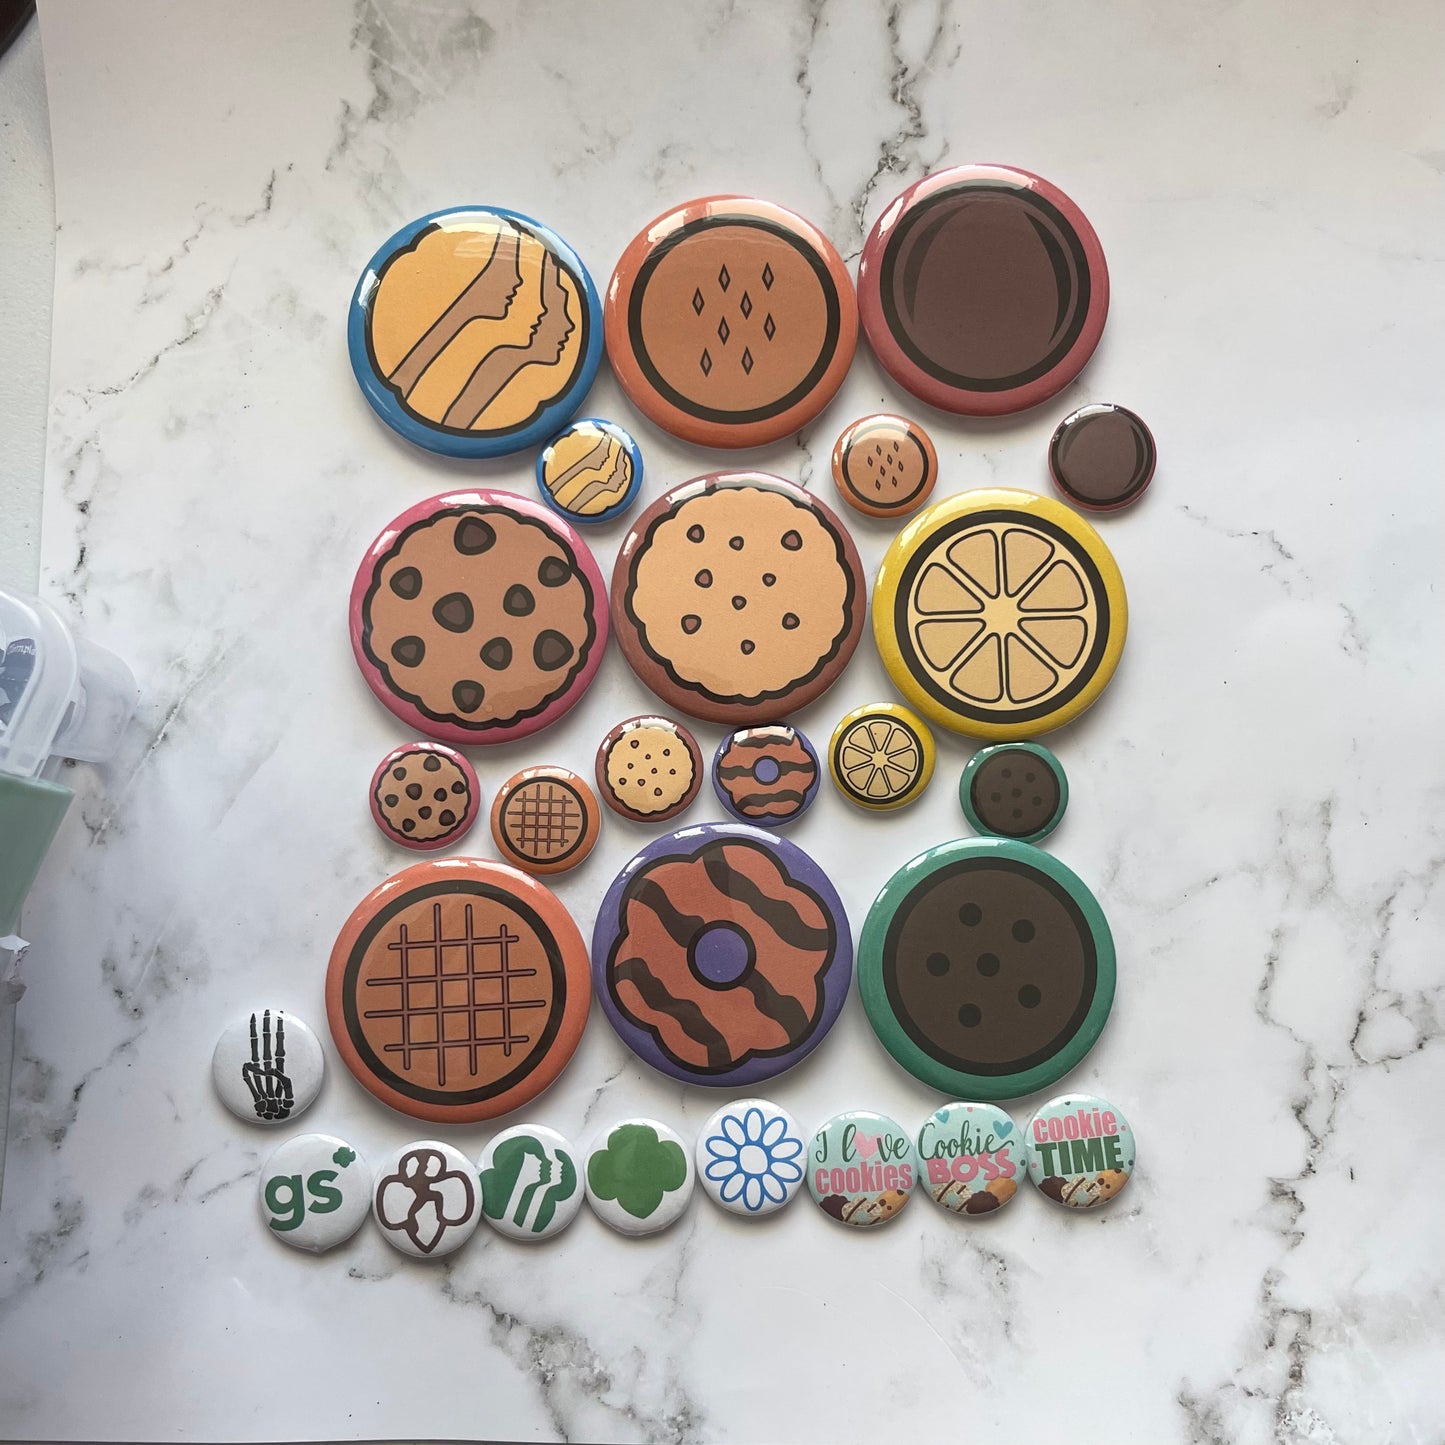 32 1 and 2.2 inch Girl Scout Cookie Pinback button badge pins, Girl Scout Gifts